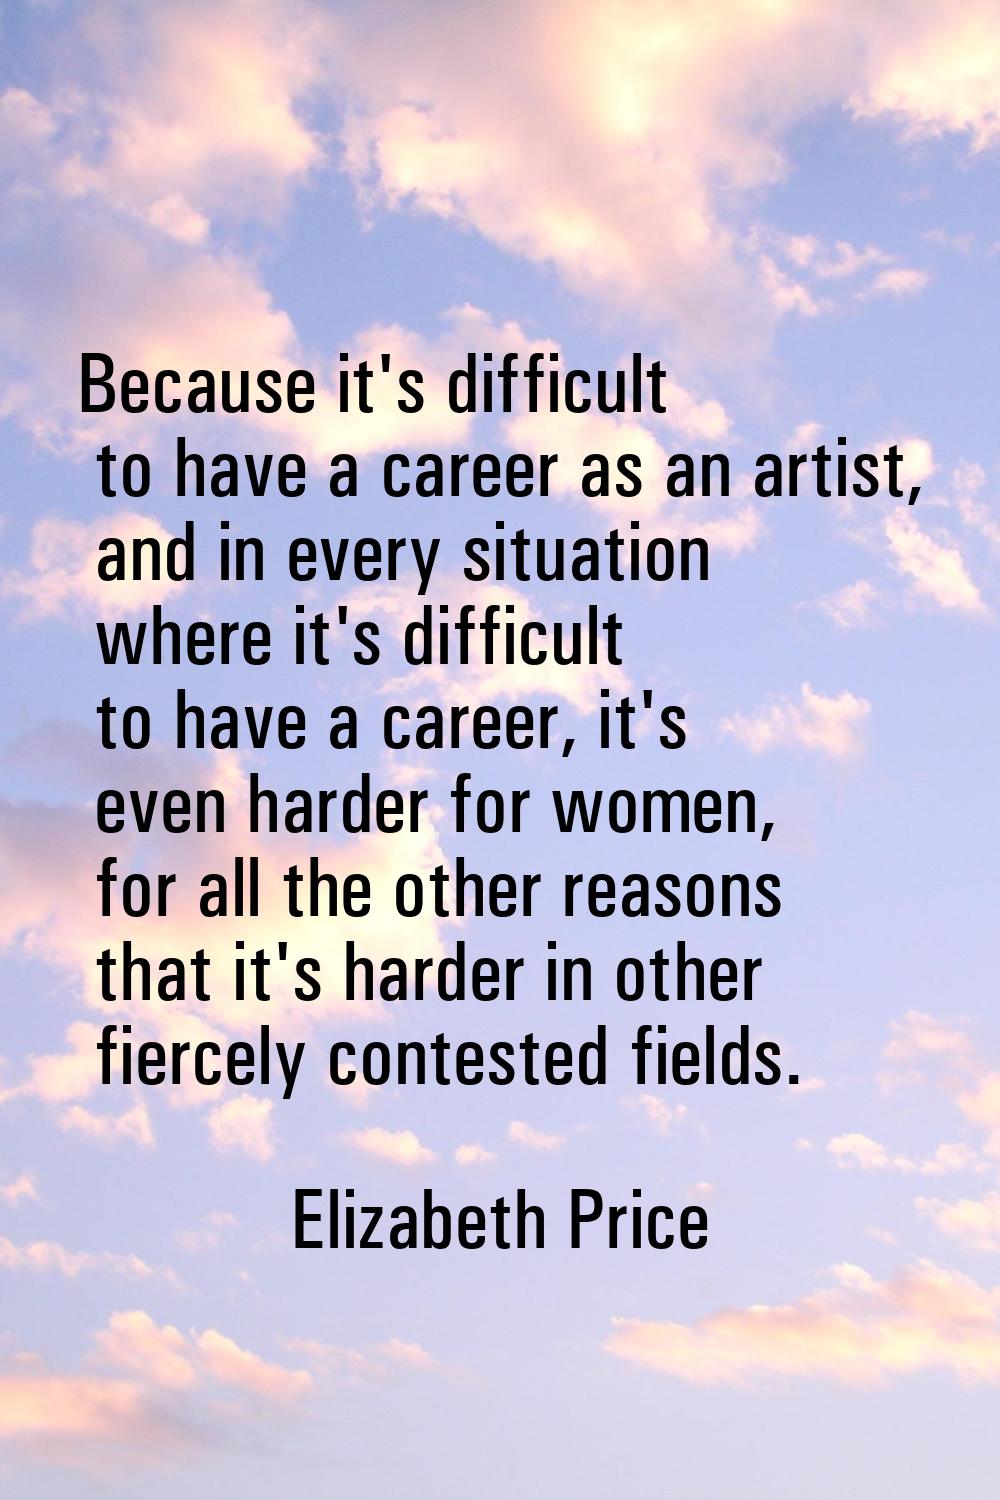 Because it's difficult to have a career as an artist, and in every situation where it's difficult t